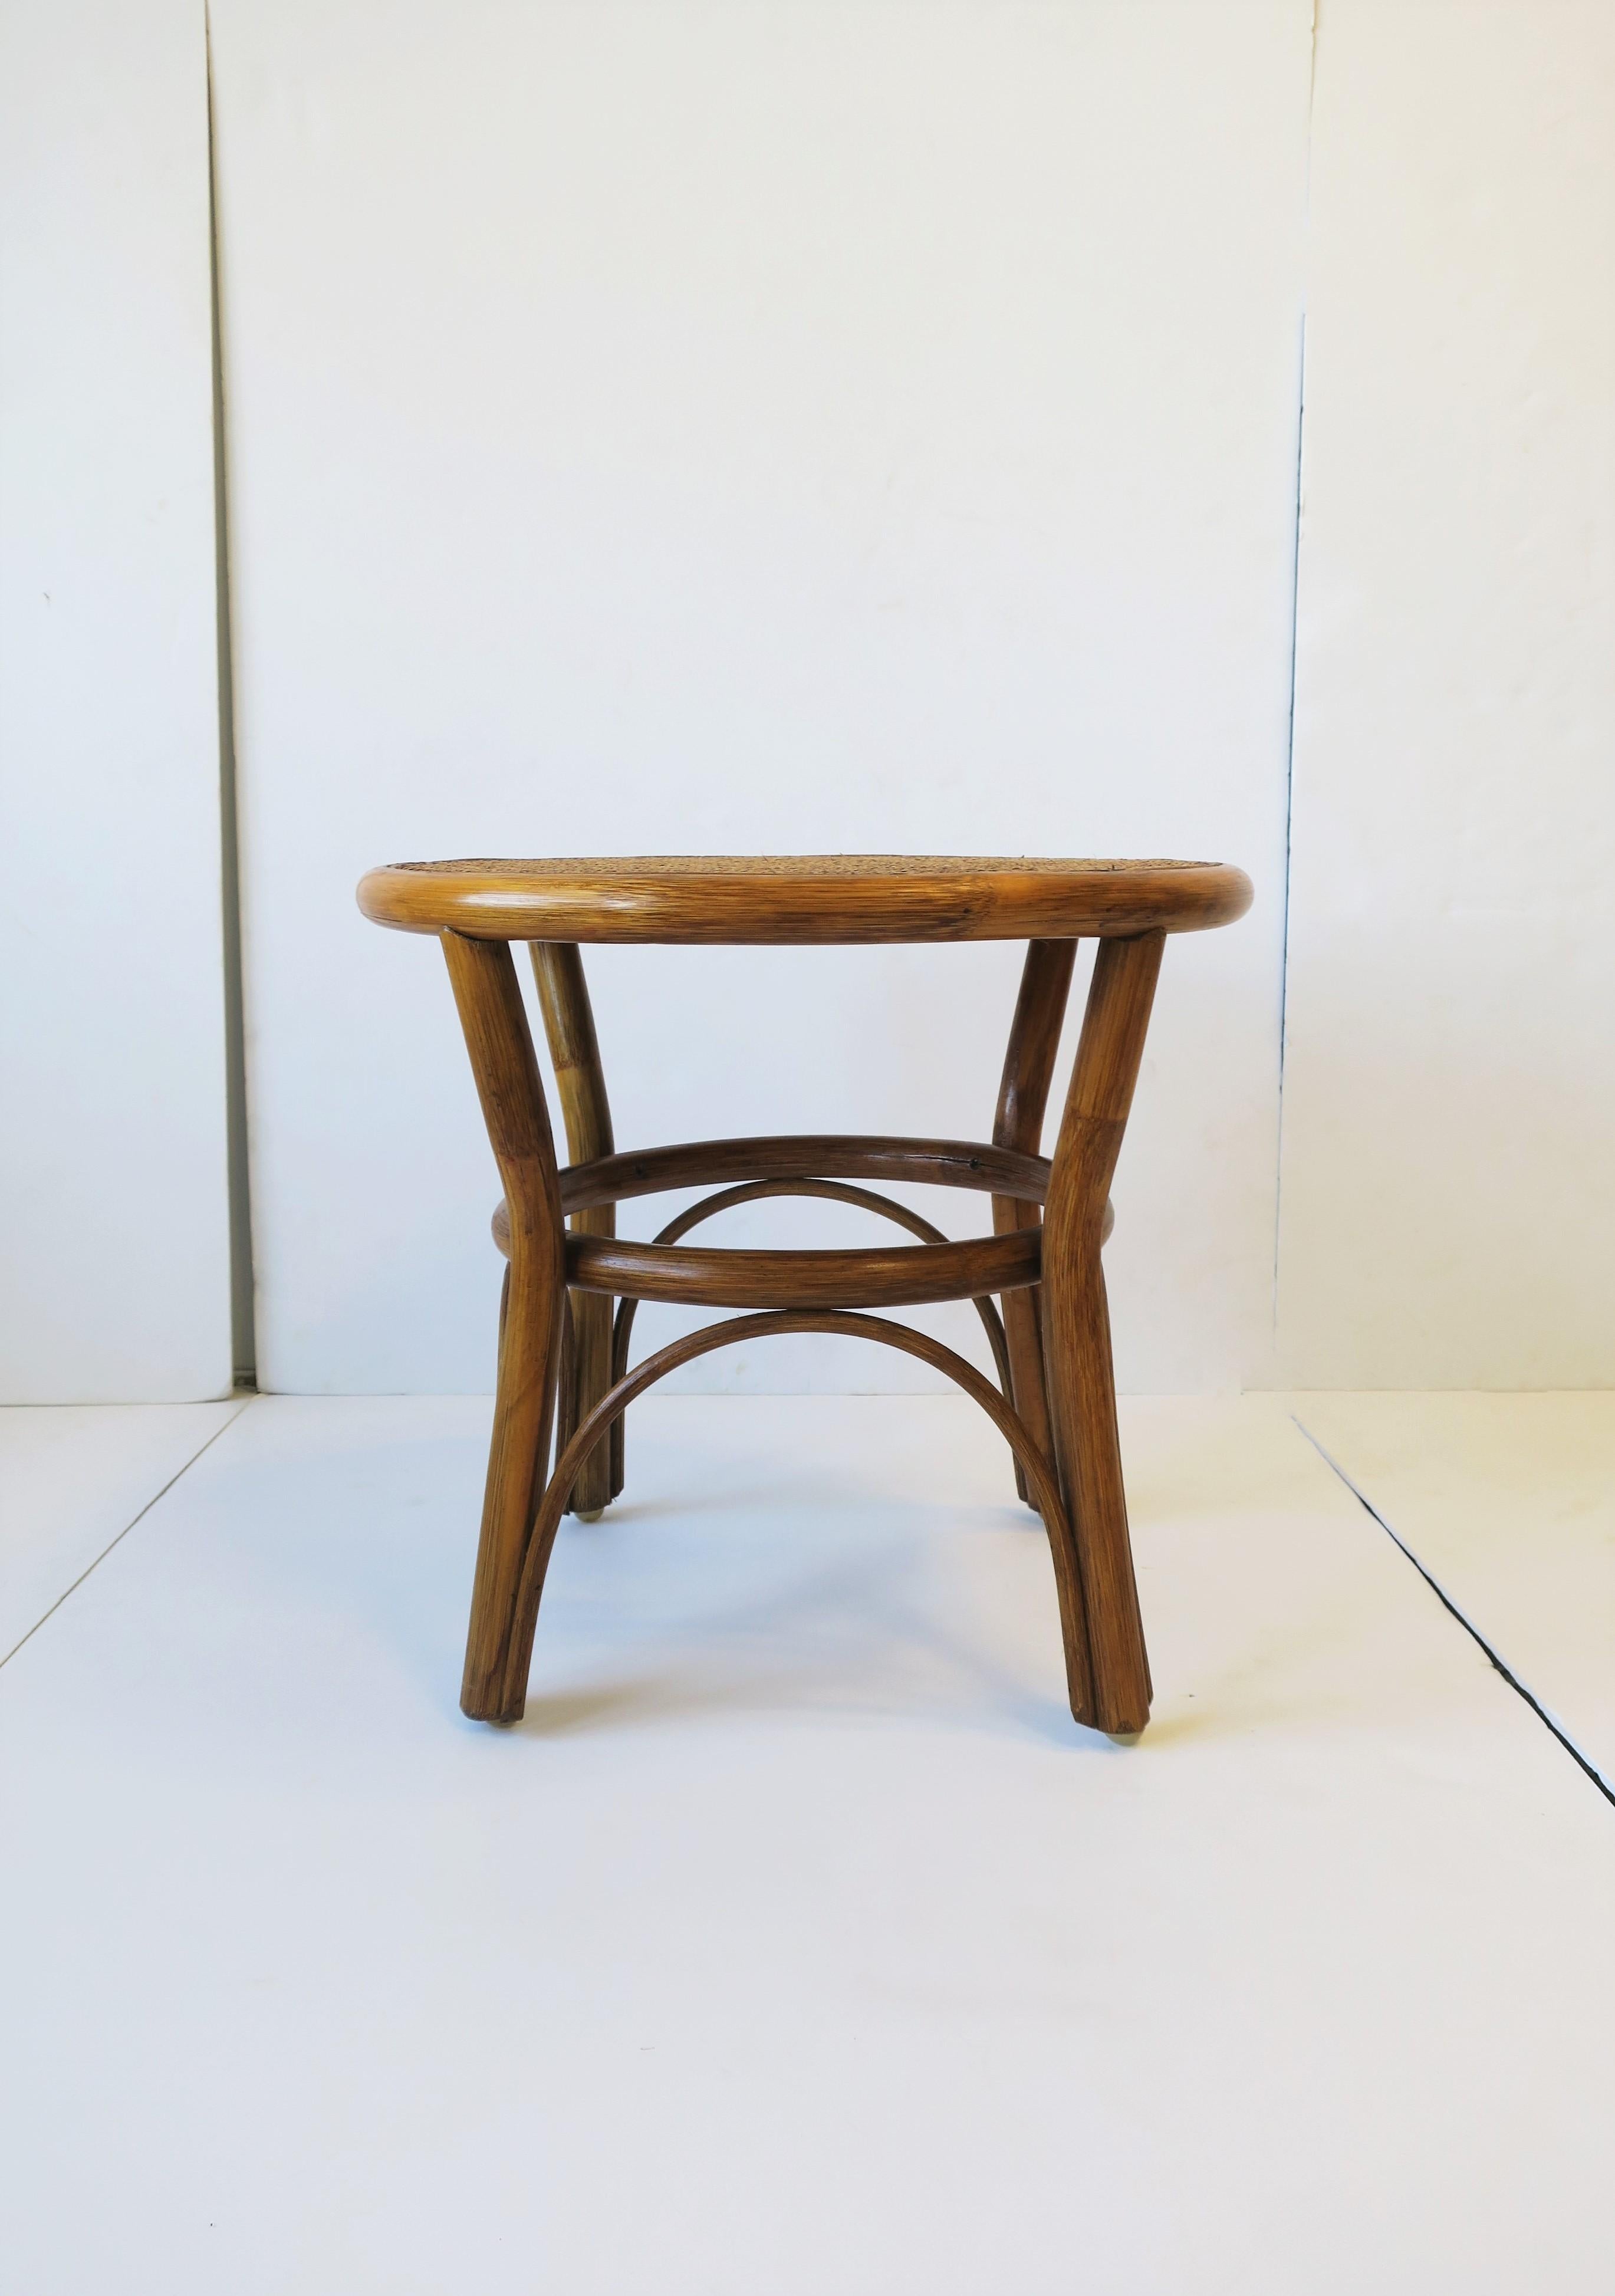 20th Century Wicker Cane Rattan Side or End Table